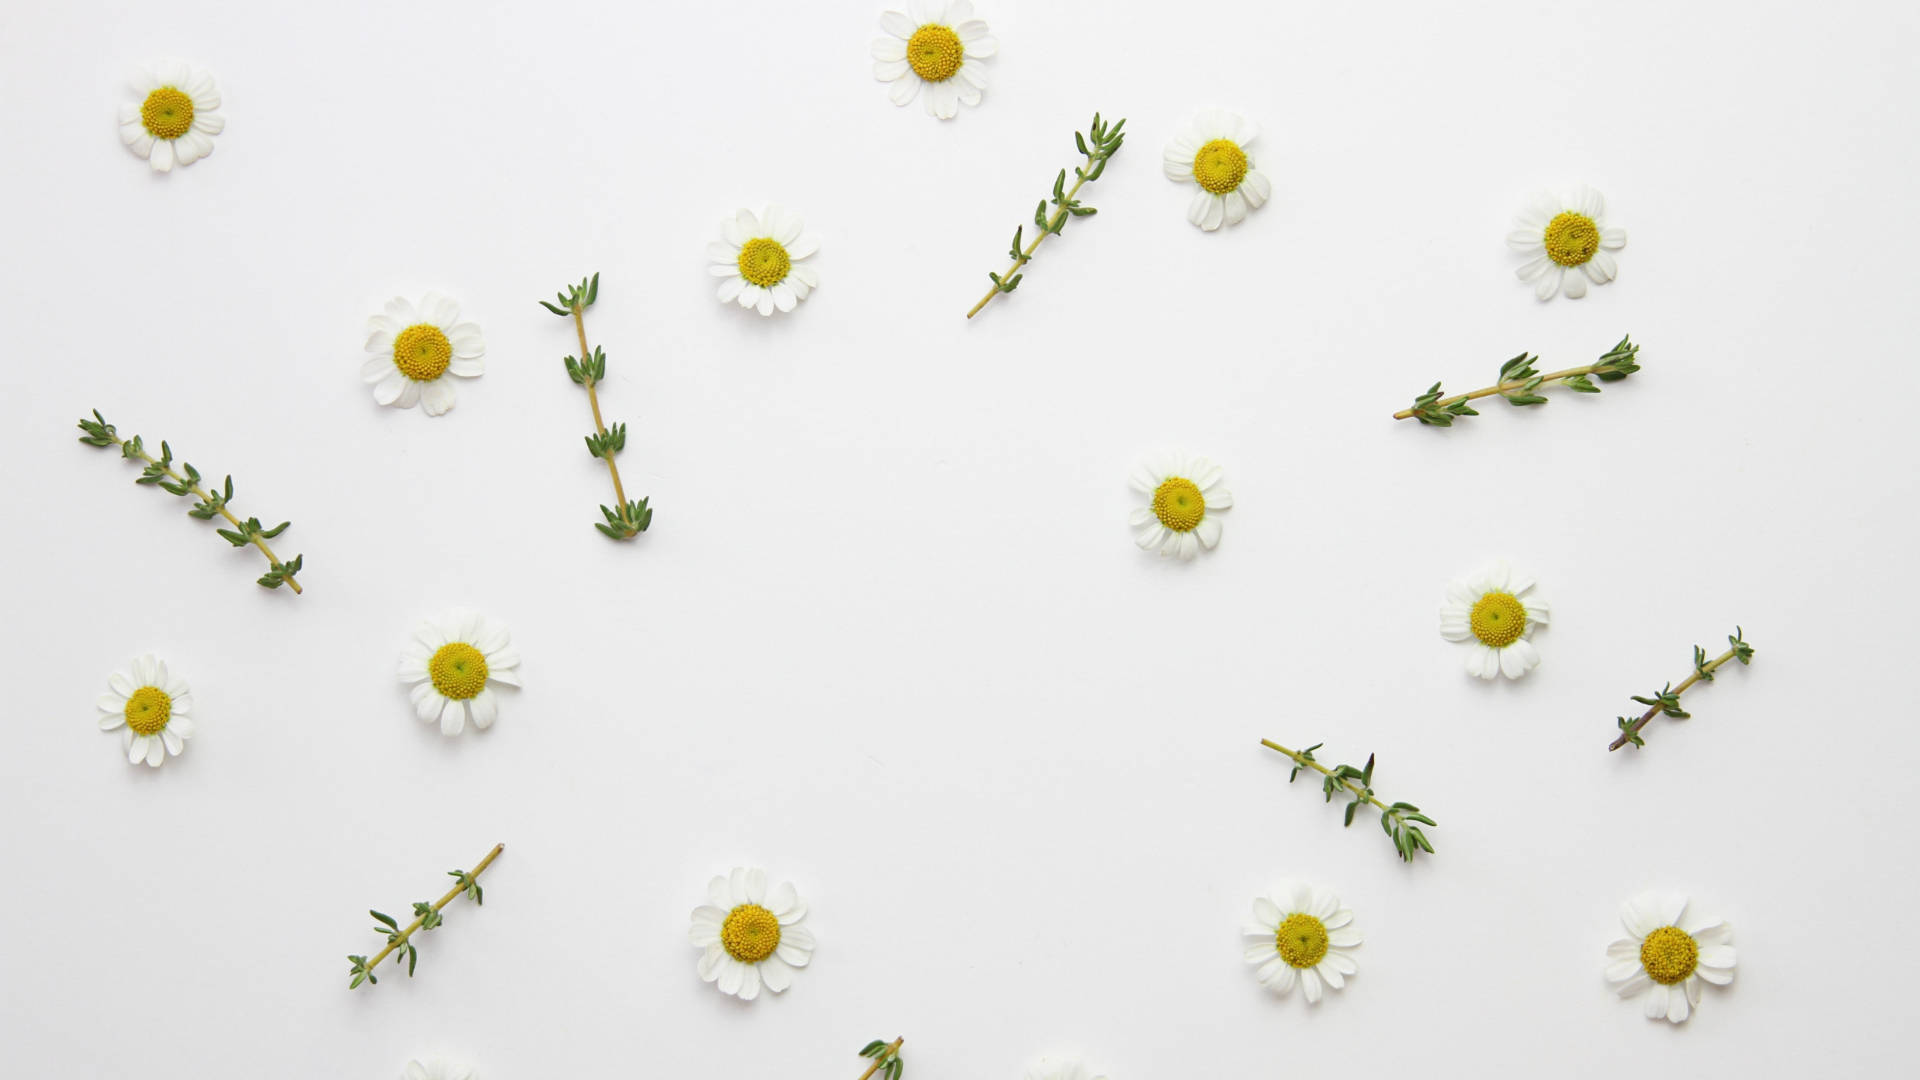 Little Daisy Flower With Thyme Leaves Wallpaper